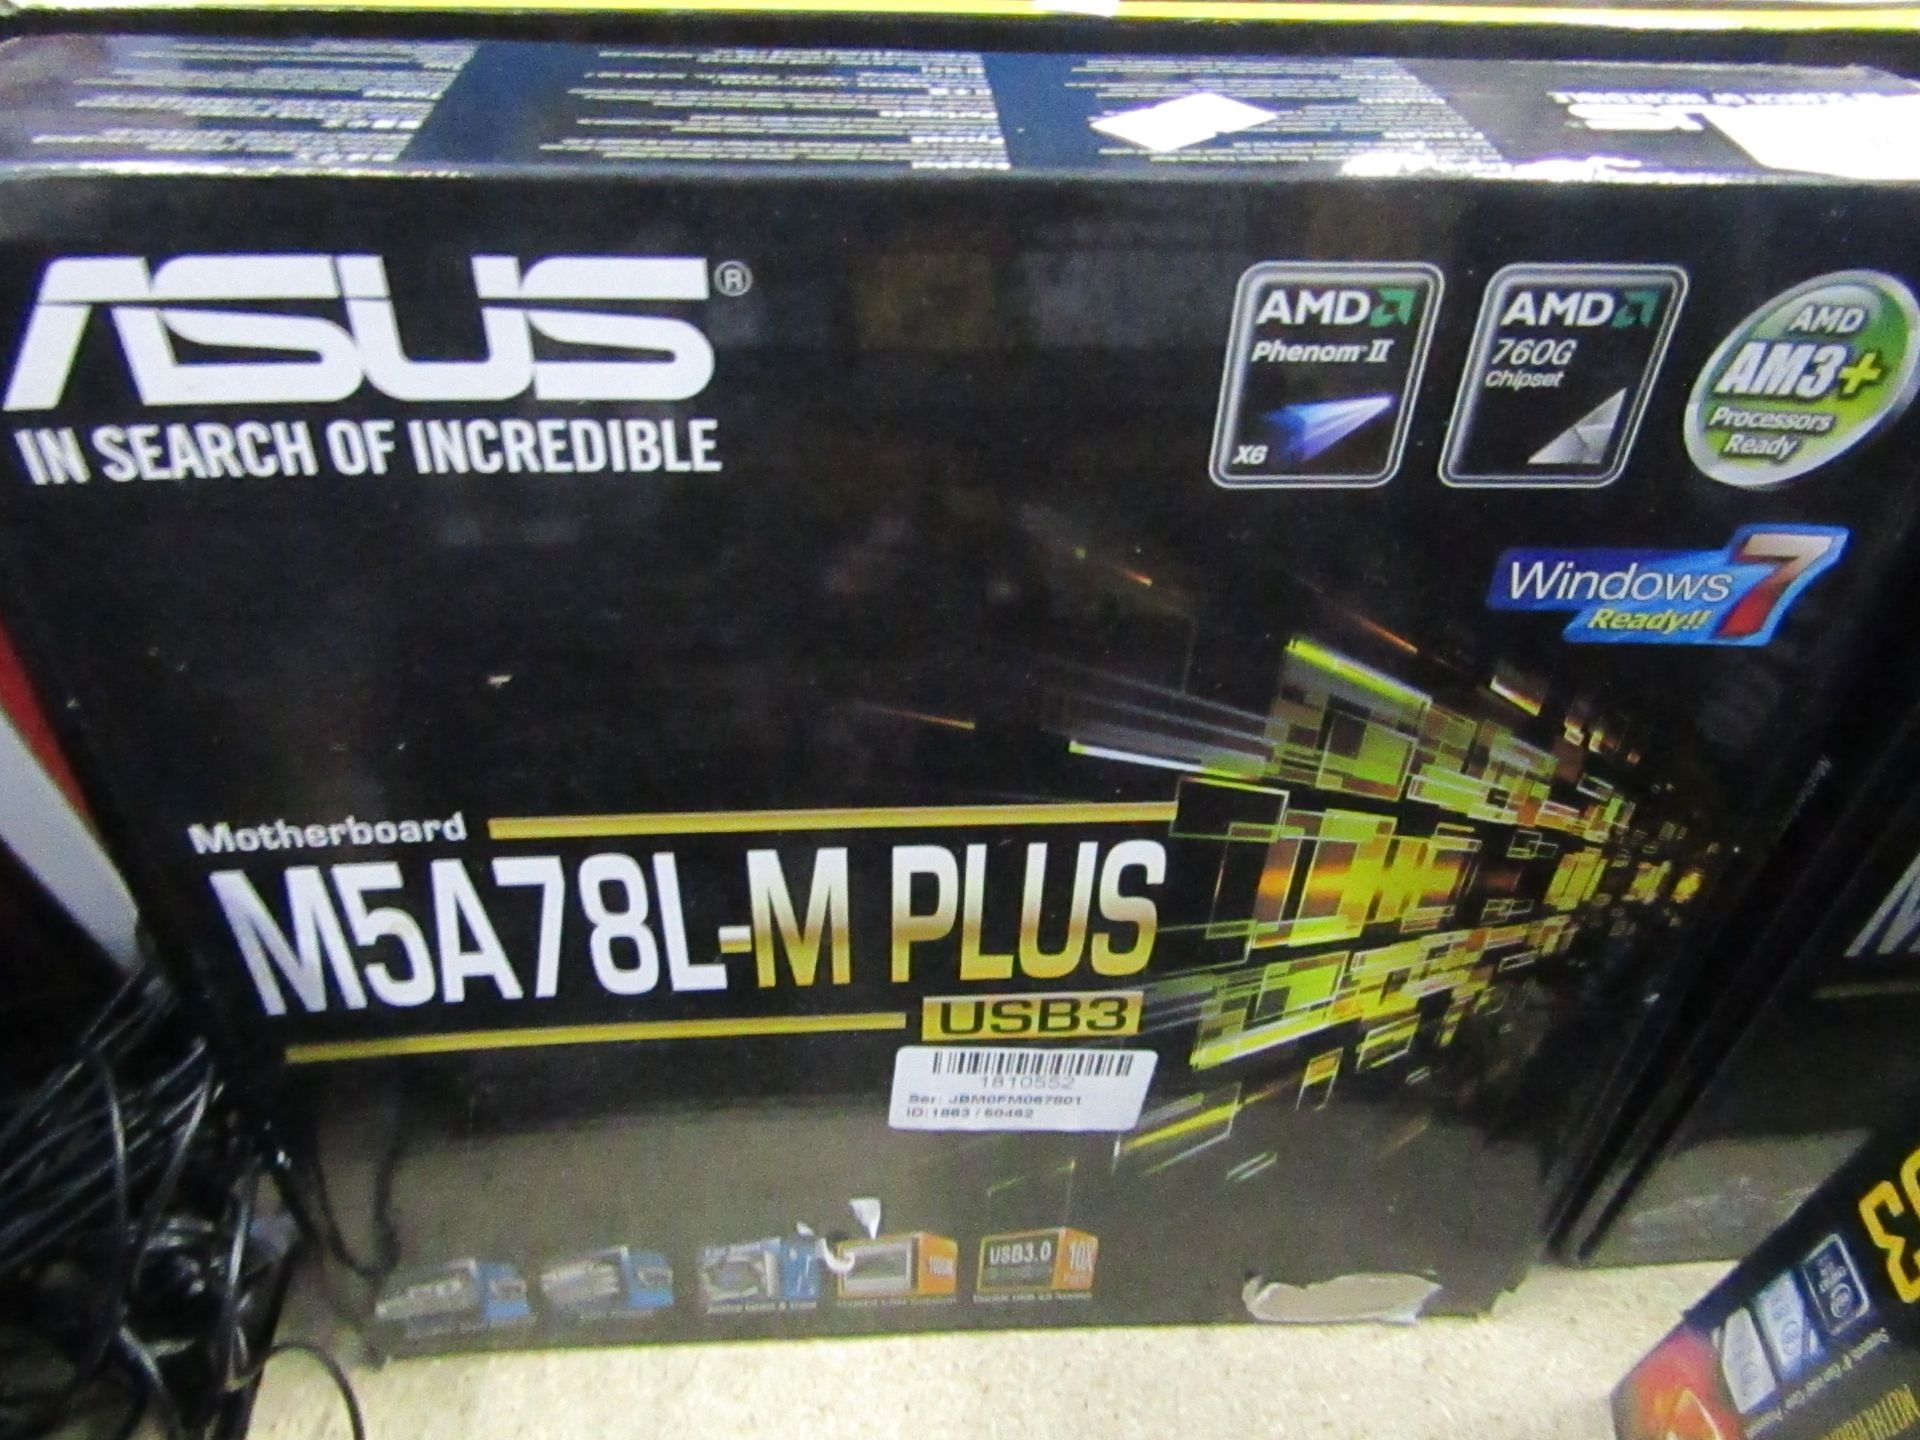 Asus M5A78L-M Plus USB 3 motherboard, untested and boxed.